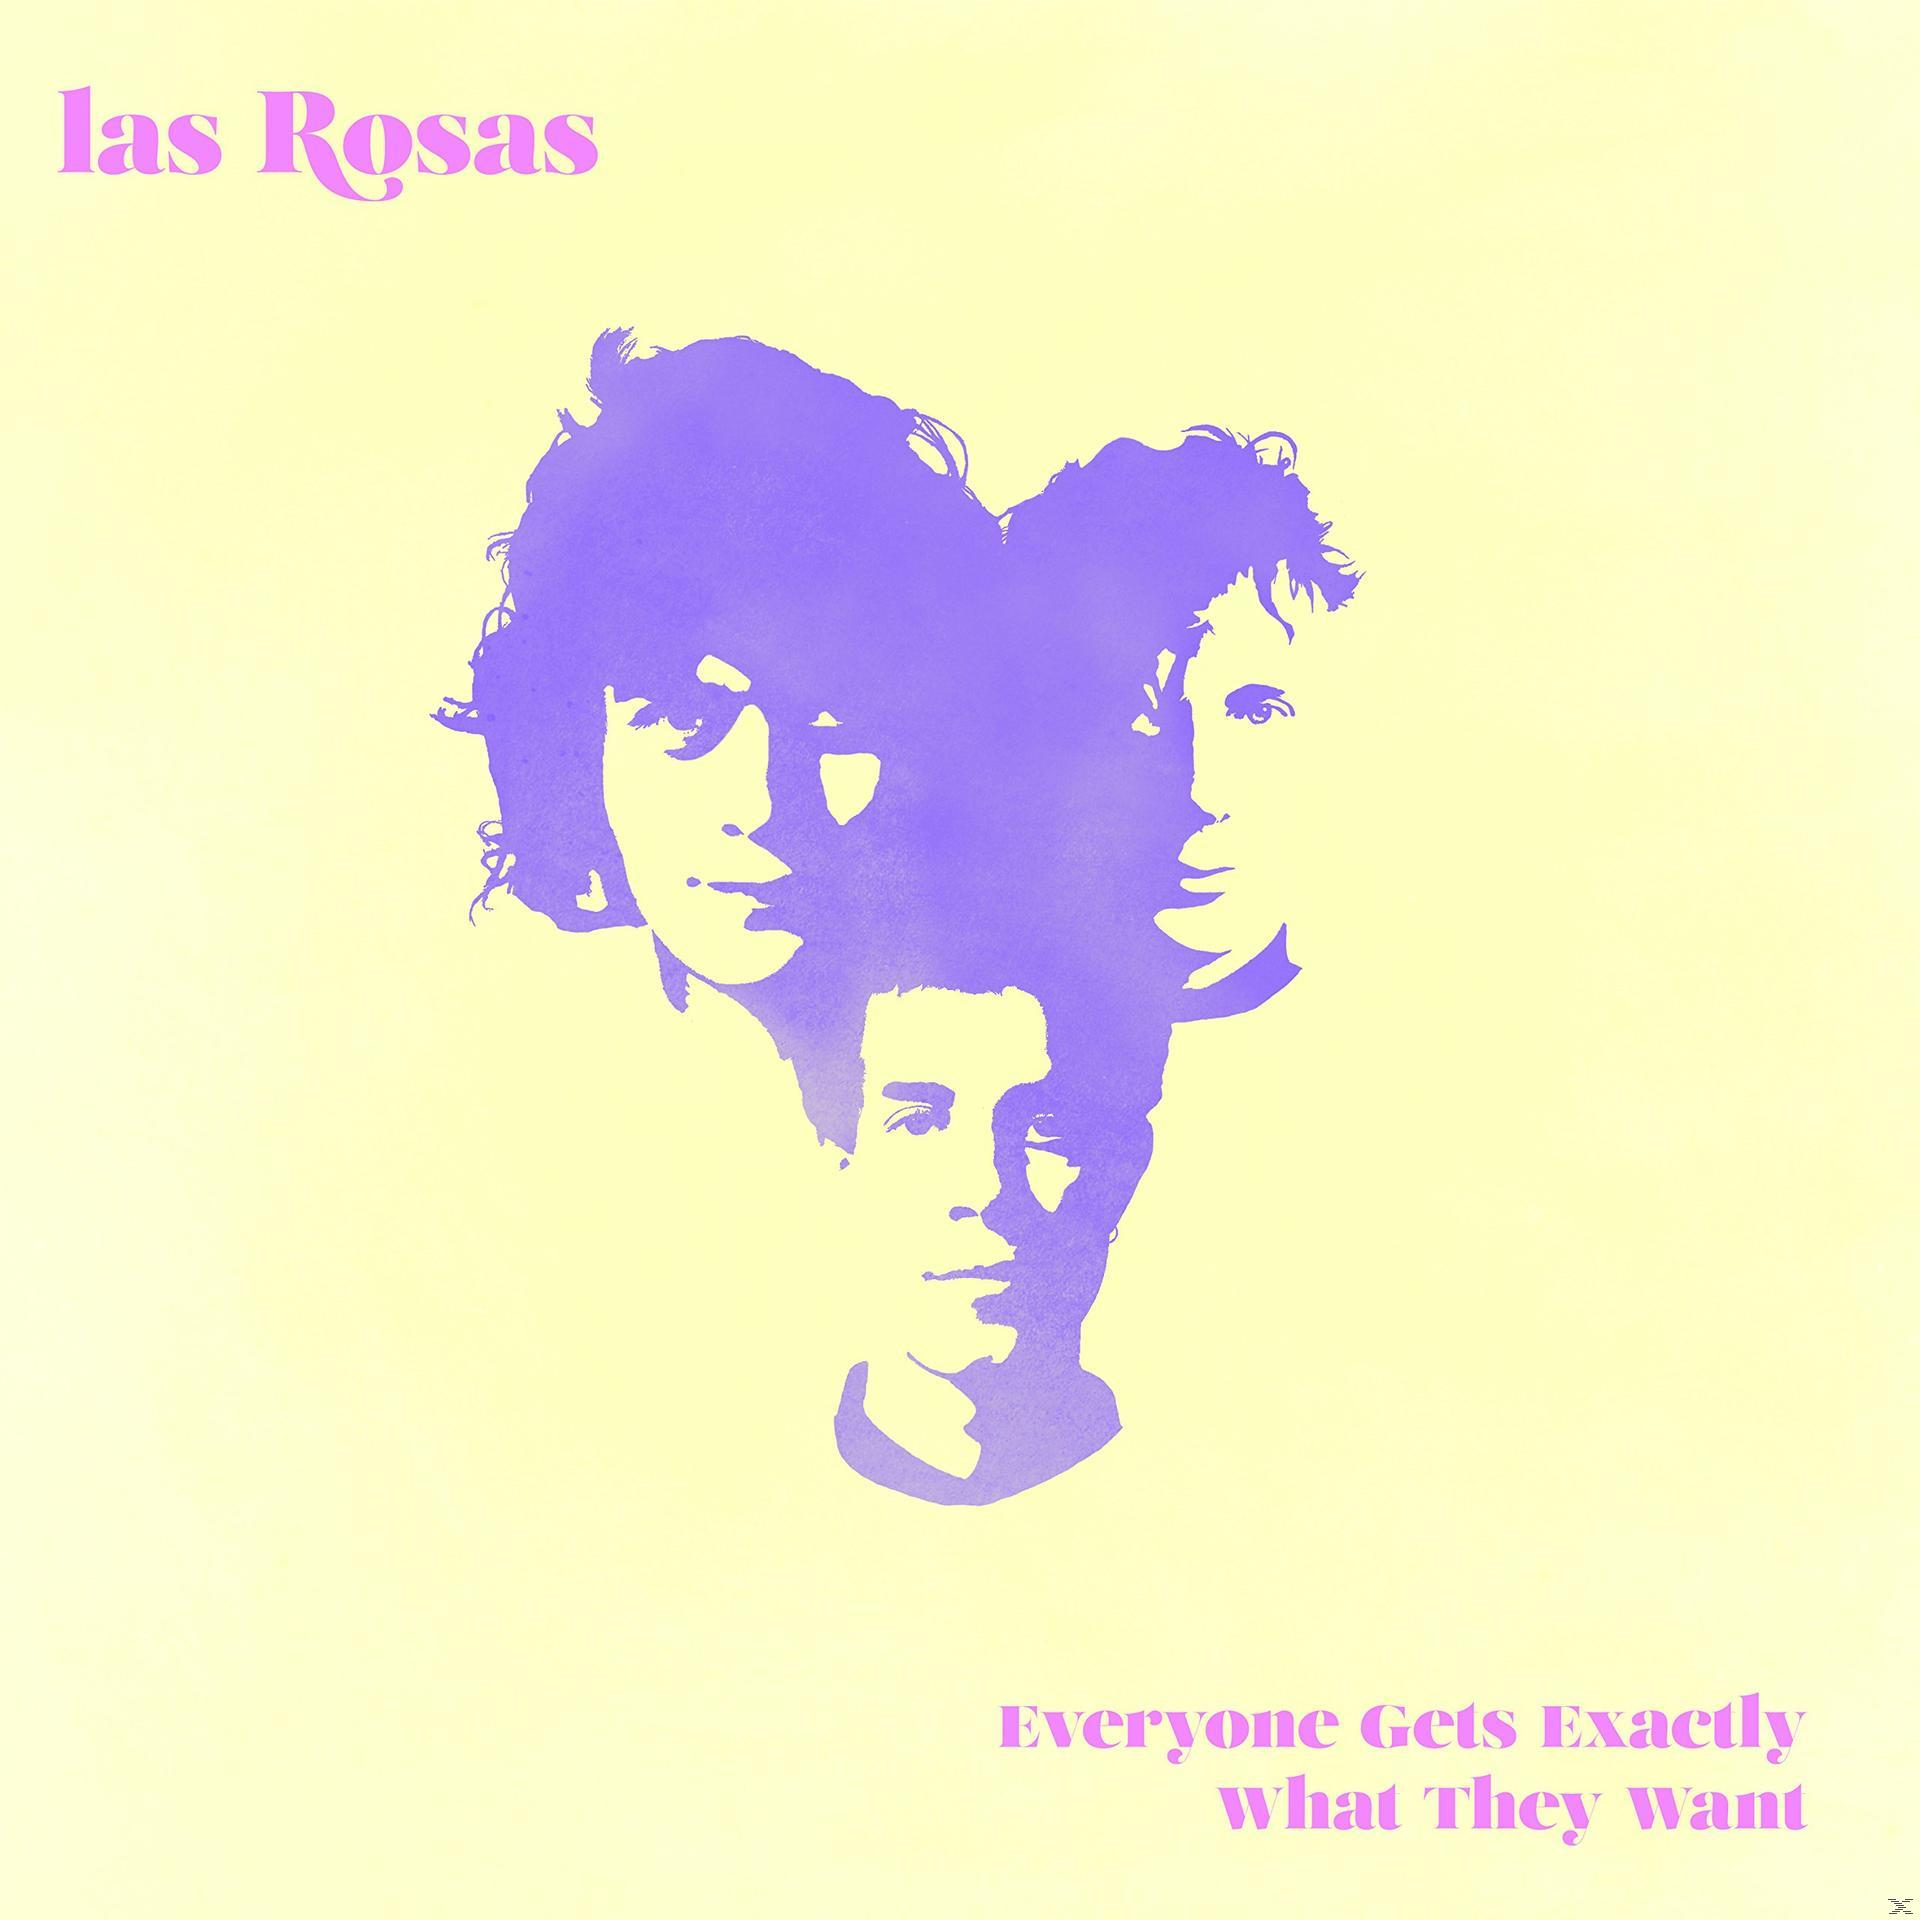 Rosas What - Everyone - Exactly Las Gets They Want (Vinyl)